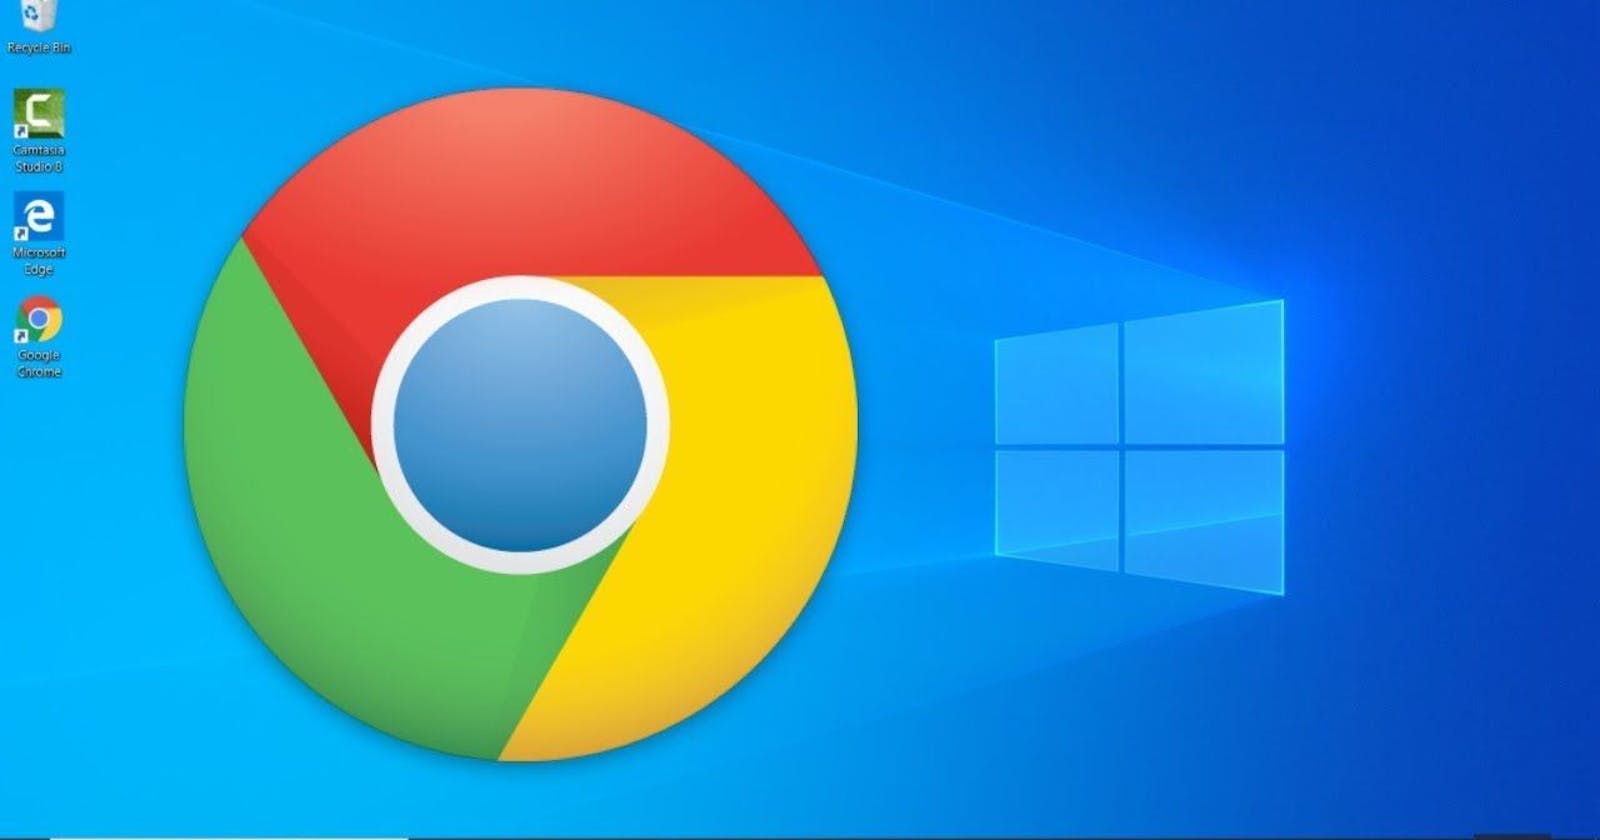 Chrome closes immediately after opening on Windows 10